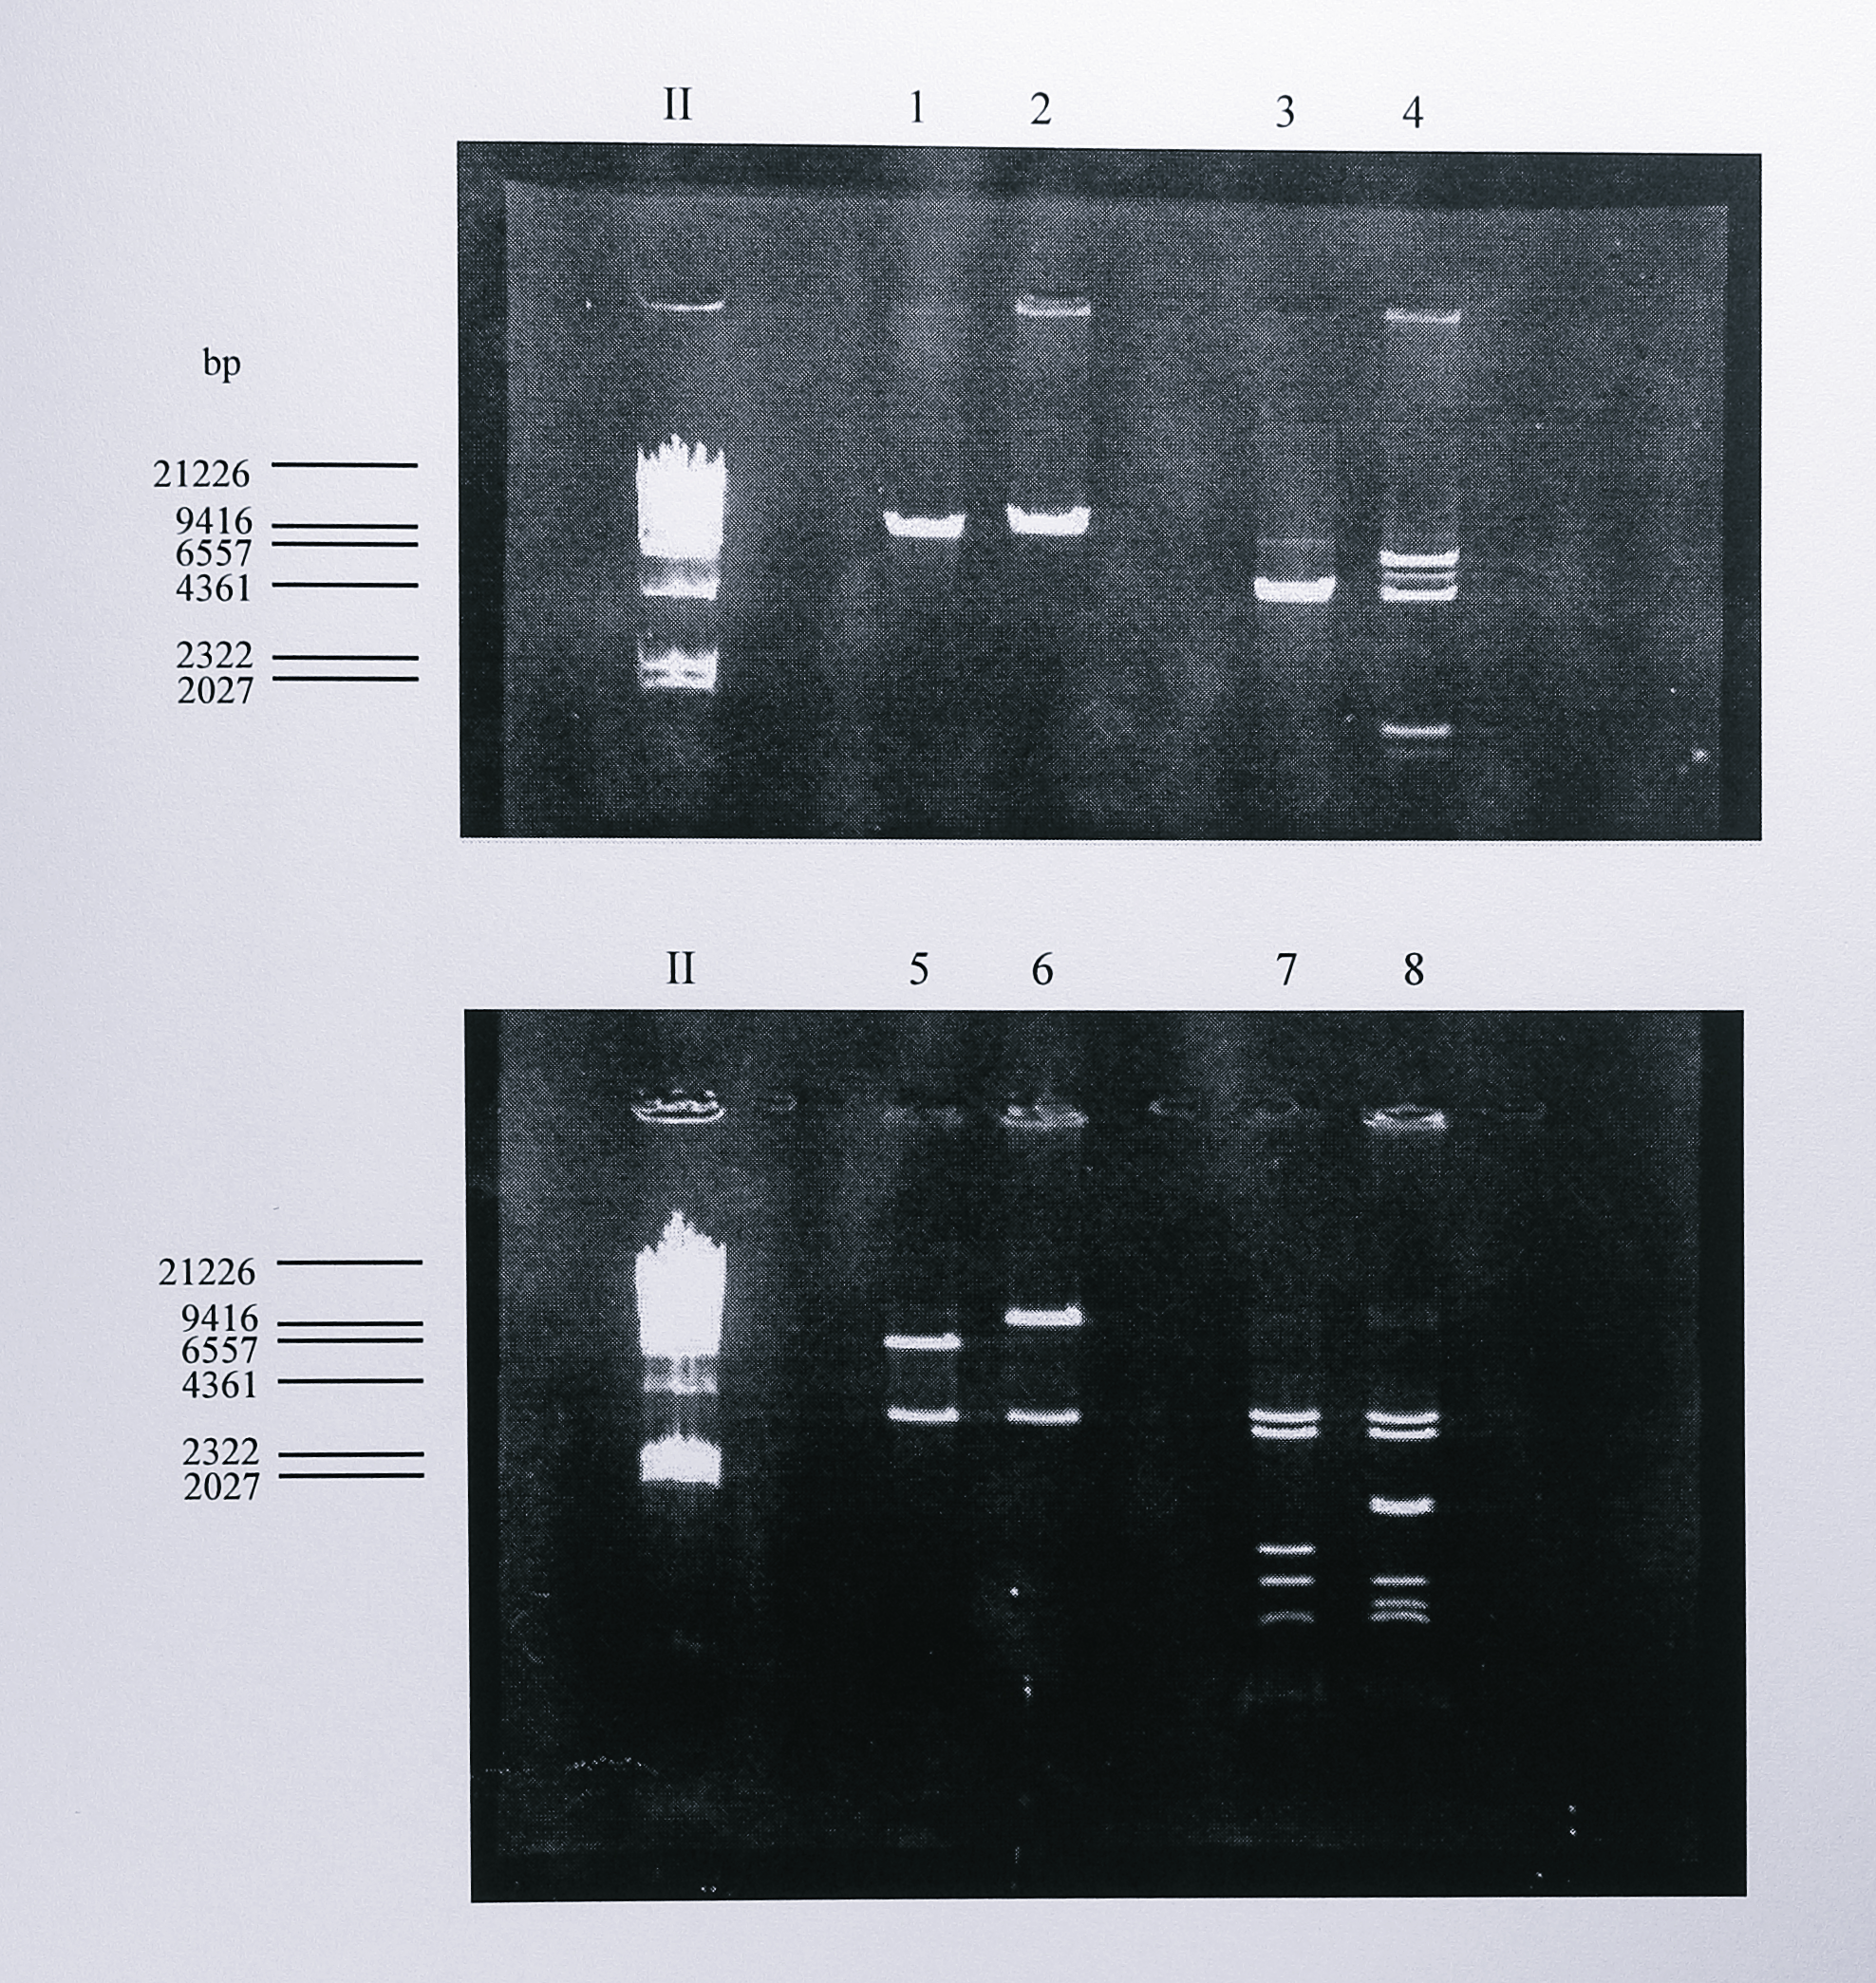 Restriction digest analysis of plasmids pRVS1 and pRVS$\Delta$nir. Following ligation and transformation, plasmid DNA was isolated from transformed _E. coli_ and digested using _EcoRI_ (lanes 1 and 2), _NruI_ (lanes 3 and 4), _SalI_ (lanes 5 and 6) and _StyI_ (lanes 7 and 8). The digested DNA was then separated by electrophoresis on a 0.8% agarose gel. Lanes 1, 3, 5 and 7 contain DNA from plasmid pRVS1, lanes 2, 4, 6 and 8 contain DNA from plasmid pRVS$\Delta$nir. As described in the text, restriction analysis of these plasmids was difficult to interpret due to the lack of a restriction map for pRVS1. However, the digests in lanes 1-2 and 5-6 clearly show that pRVS$\Delta$nir contains an insert of around 3.8 kbp, the expected size of the insert. The digests in lanes 3-4 and 7-8 show extra _NruI_ and _StyI_ sites in pRVS$\Delta$nir which can be related to the known sequence of the _nirS_ gene and to restriction analysis of plasmids containing the _nir_ region (Chapter 4). The lane labelled II contains DNA size standards, the sizes of some of which are indicated at the left of the gel.